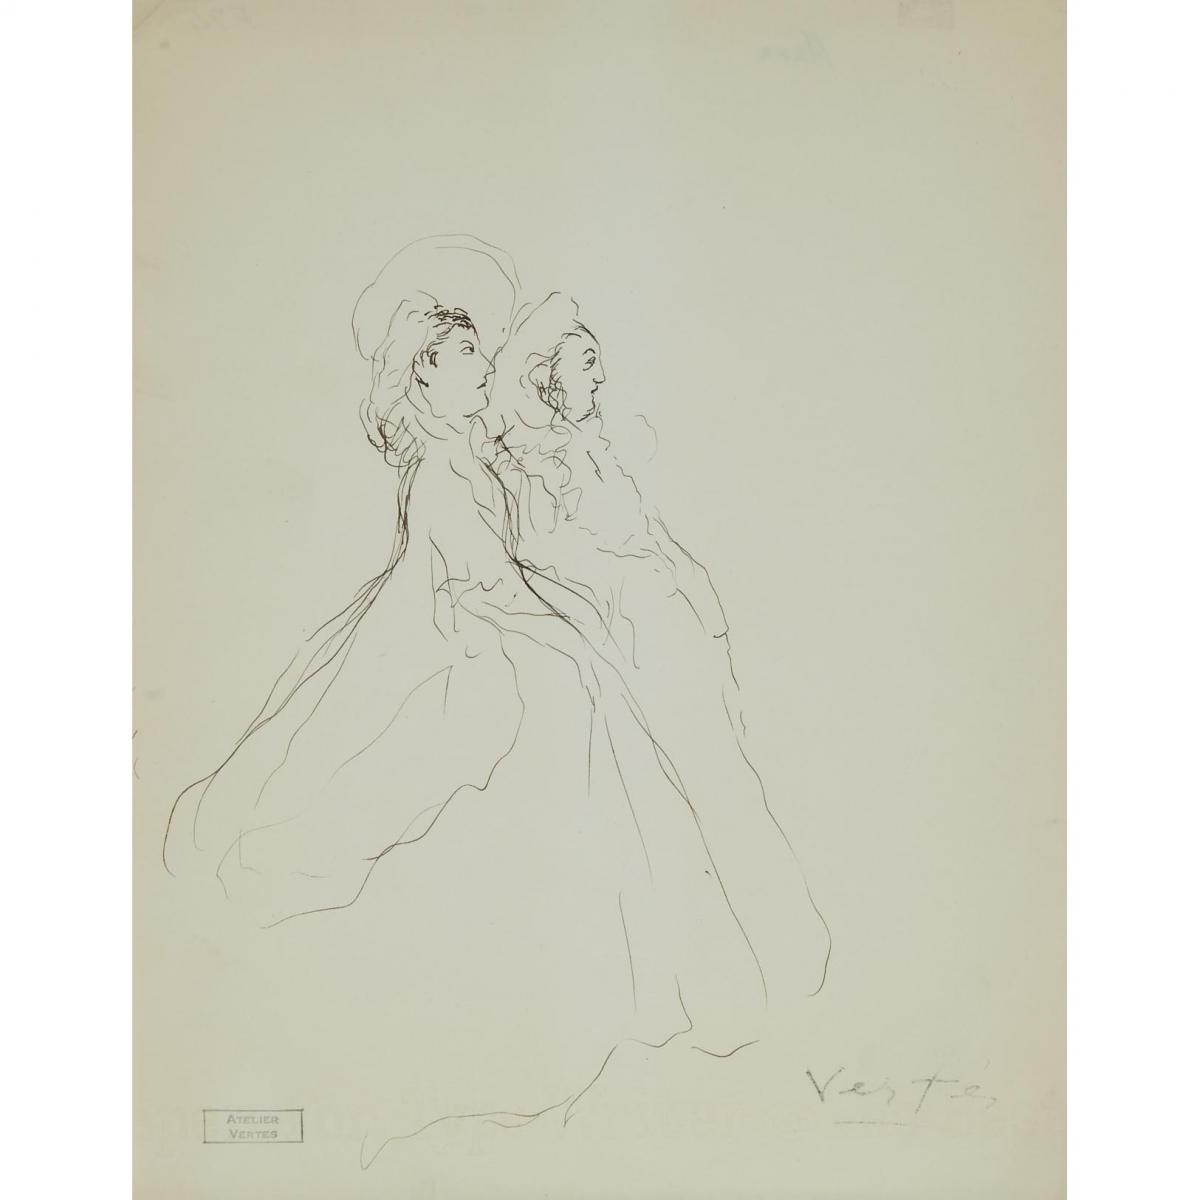 Various Artists, COLLECTION OF DRAWINGS, SOME 1956, Auguste François (Marie) Gorguet (1862-1927), Fr - Image 5 of 17